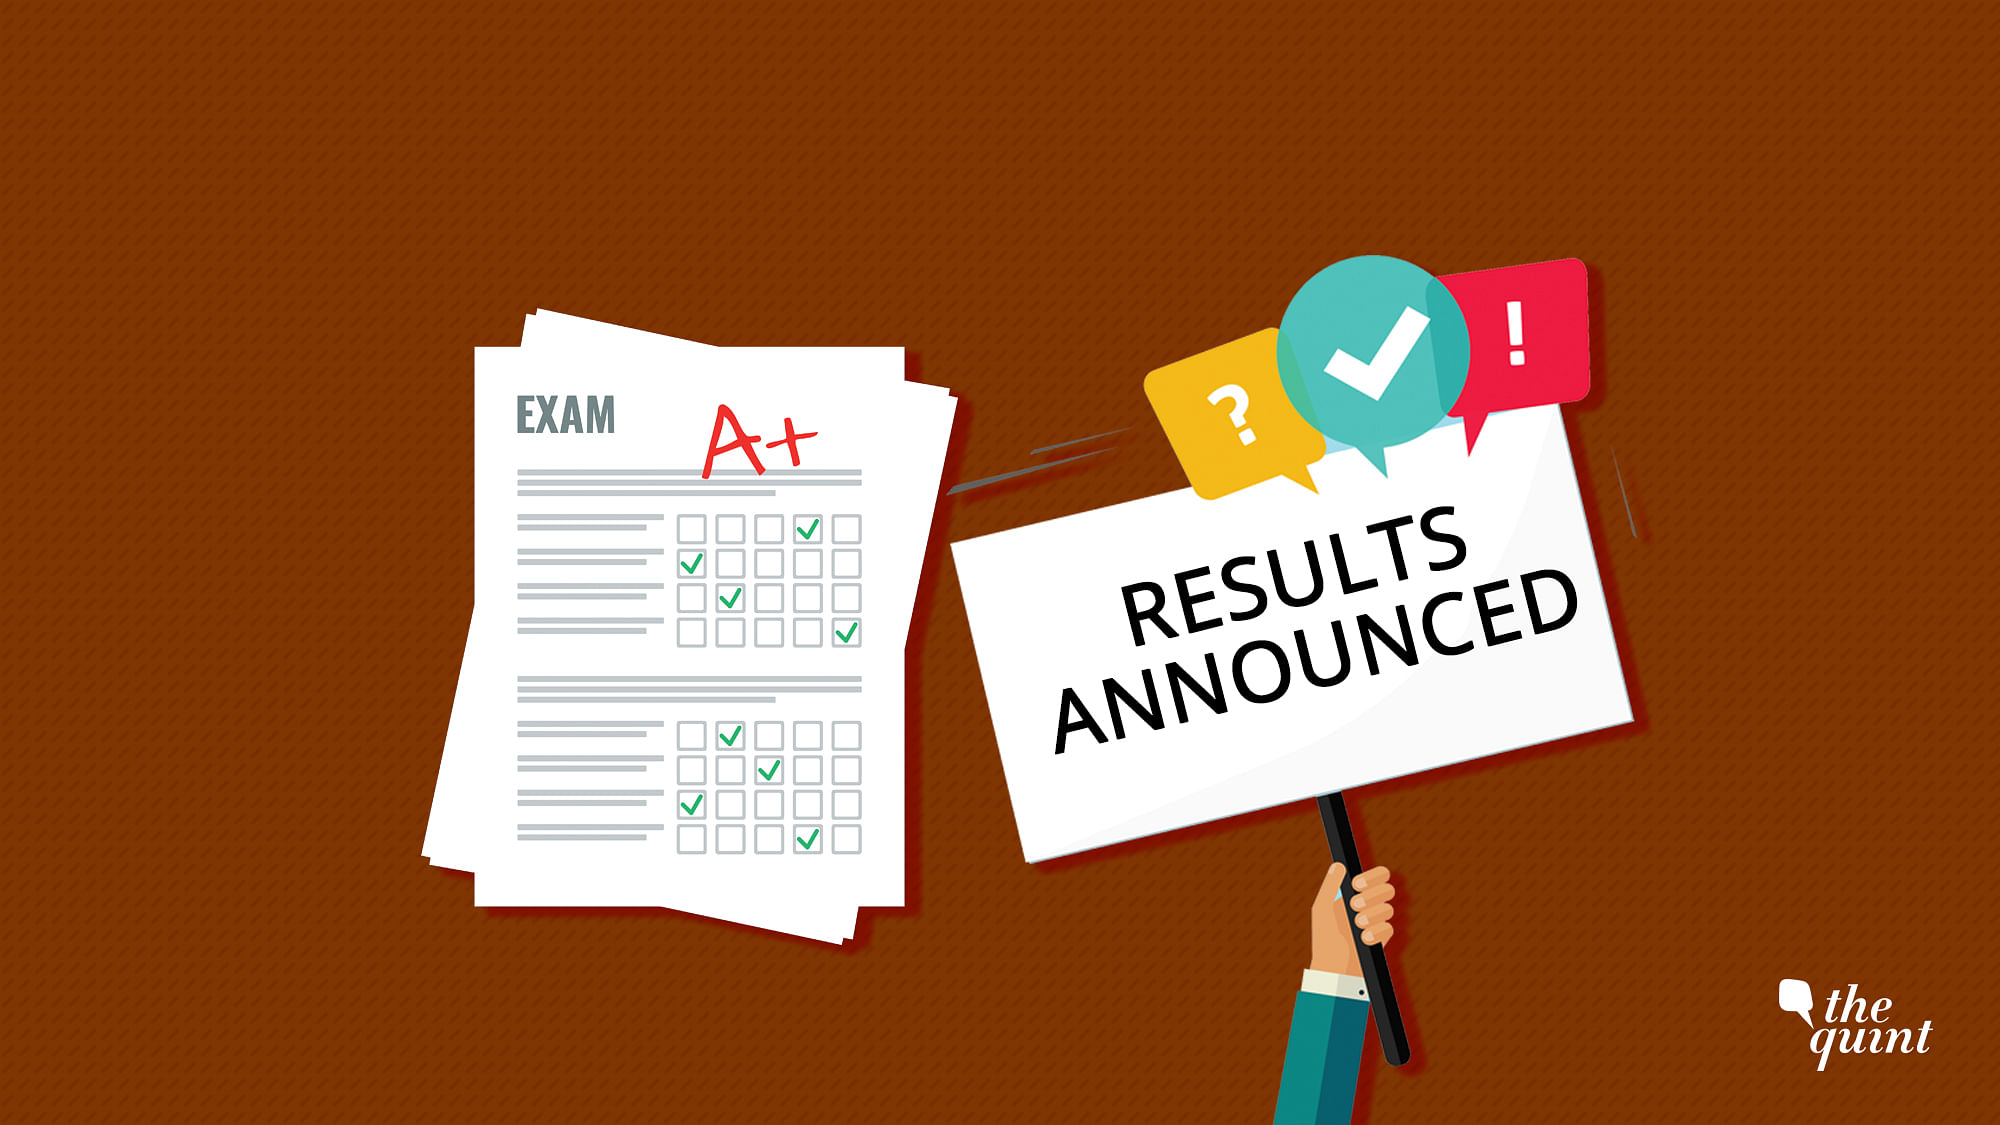 Chhattisgarh Board of Secondary Education (CGBSE) has released the Class 12 board result today. The results will be available on cgbse.nic.in or results.cg.nic.in